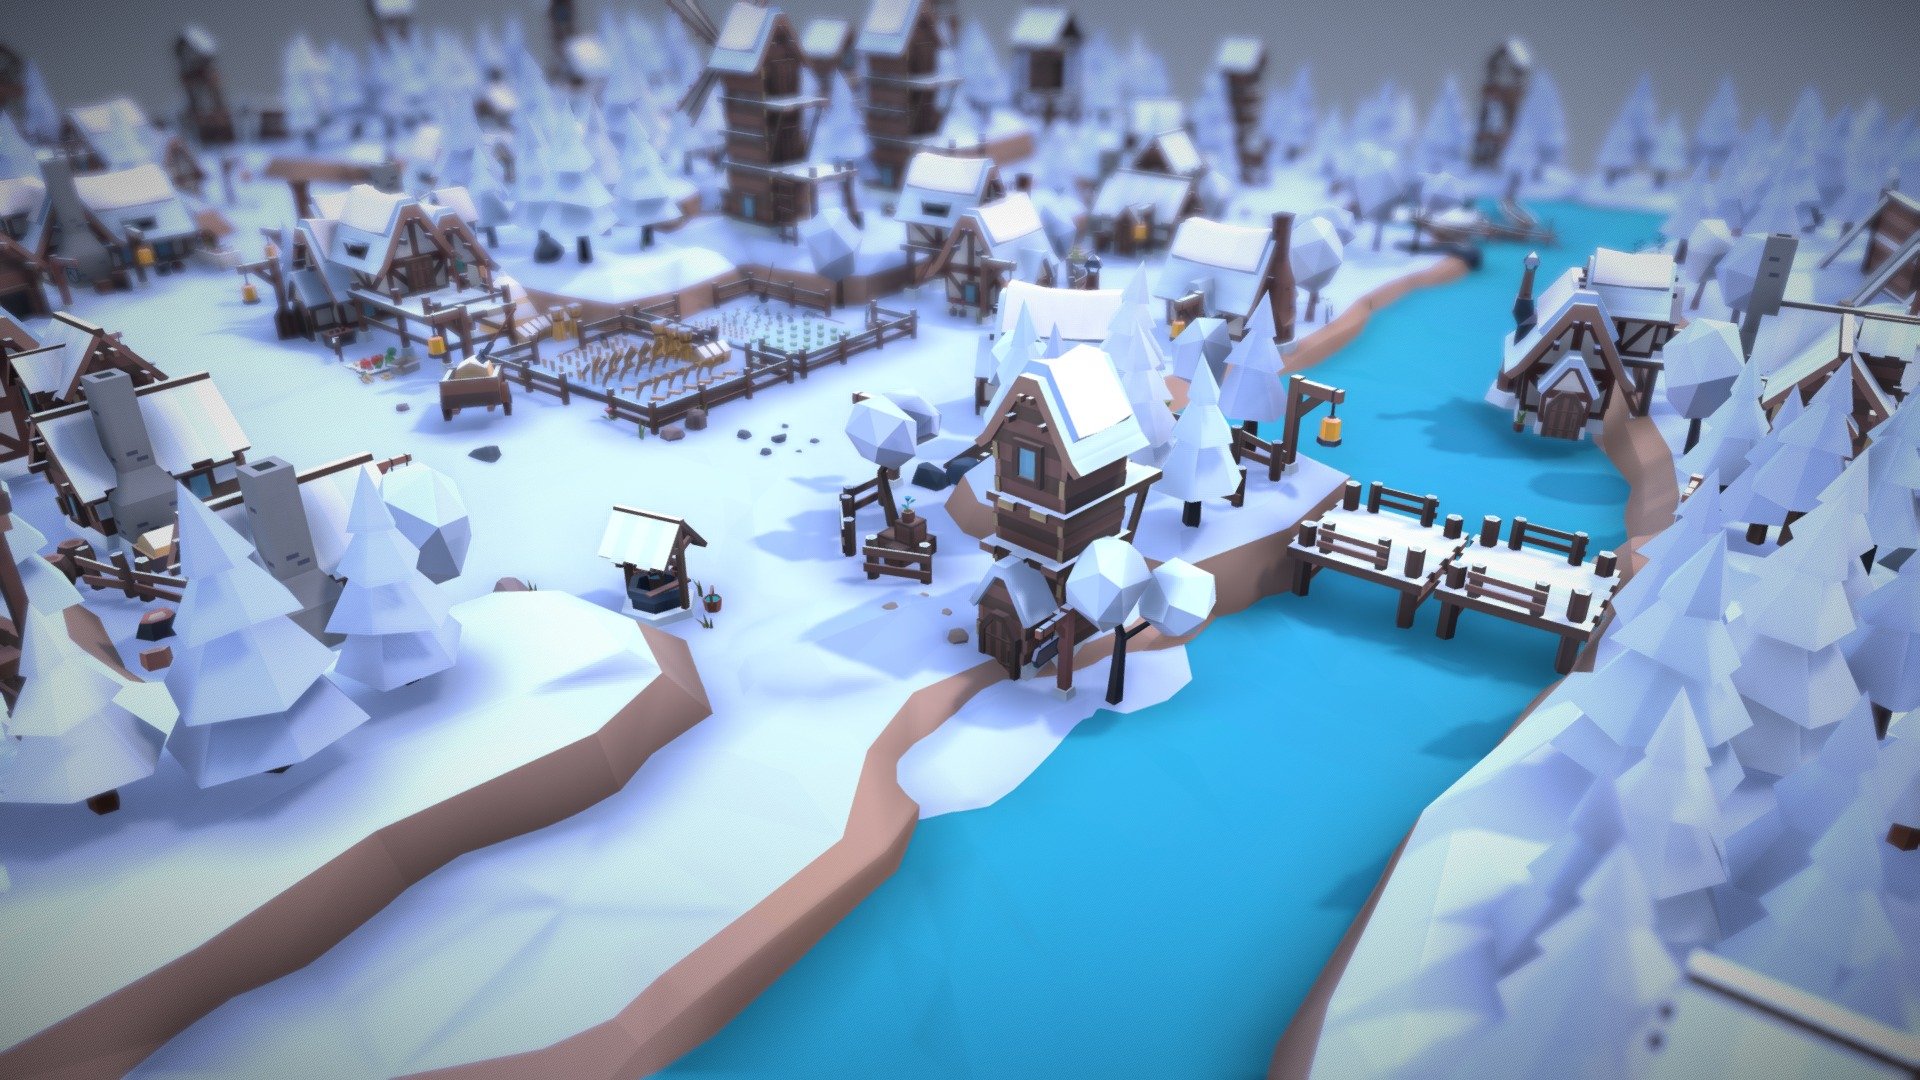 Tarbo - Fantasy Village
A low poly asset pack of Fantasy themed polygonal style game.
Modular parts are easy to piece together in a variety of combinations.
This product is designed to TopDown, RPG, Adventure, RTS.
You can create beautiful, diverse villages of your own.


Download

FEATURES



485 Useful prefabs

3 Color themes (6 colors with snow version) + 1 autumn version

57 Modular building parts

37 Premade buildings

26 Grounds

216 Props

149 Environment objects

11 Scenes in Various Styles

Lightmap Support

Simple polygonal style

Optimized meshes useful for mobile, AR, VR, PC

Works in Unity 2019.4 and above

Support Universal Render Pipeline (URP)


UPDATES &amp; NEWS



WEBSITE
 - Fantasy Village "Riverside Village Winter" - 3D model by Tarbo Studios (@tarboStudios) 3d model